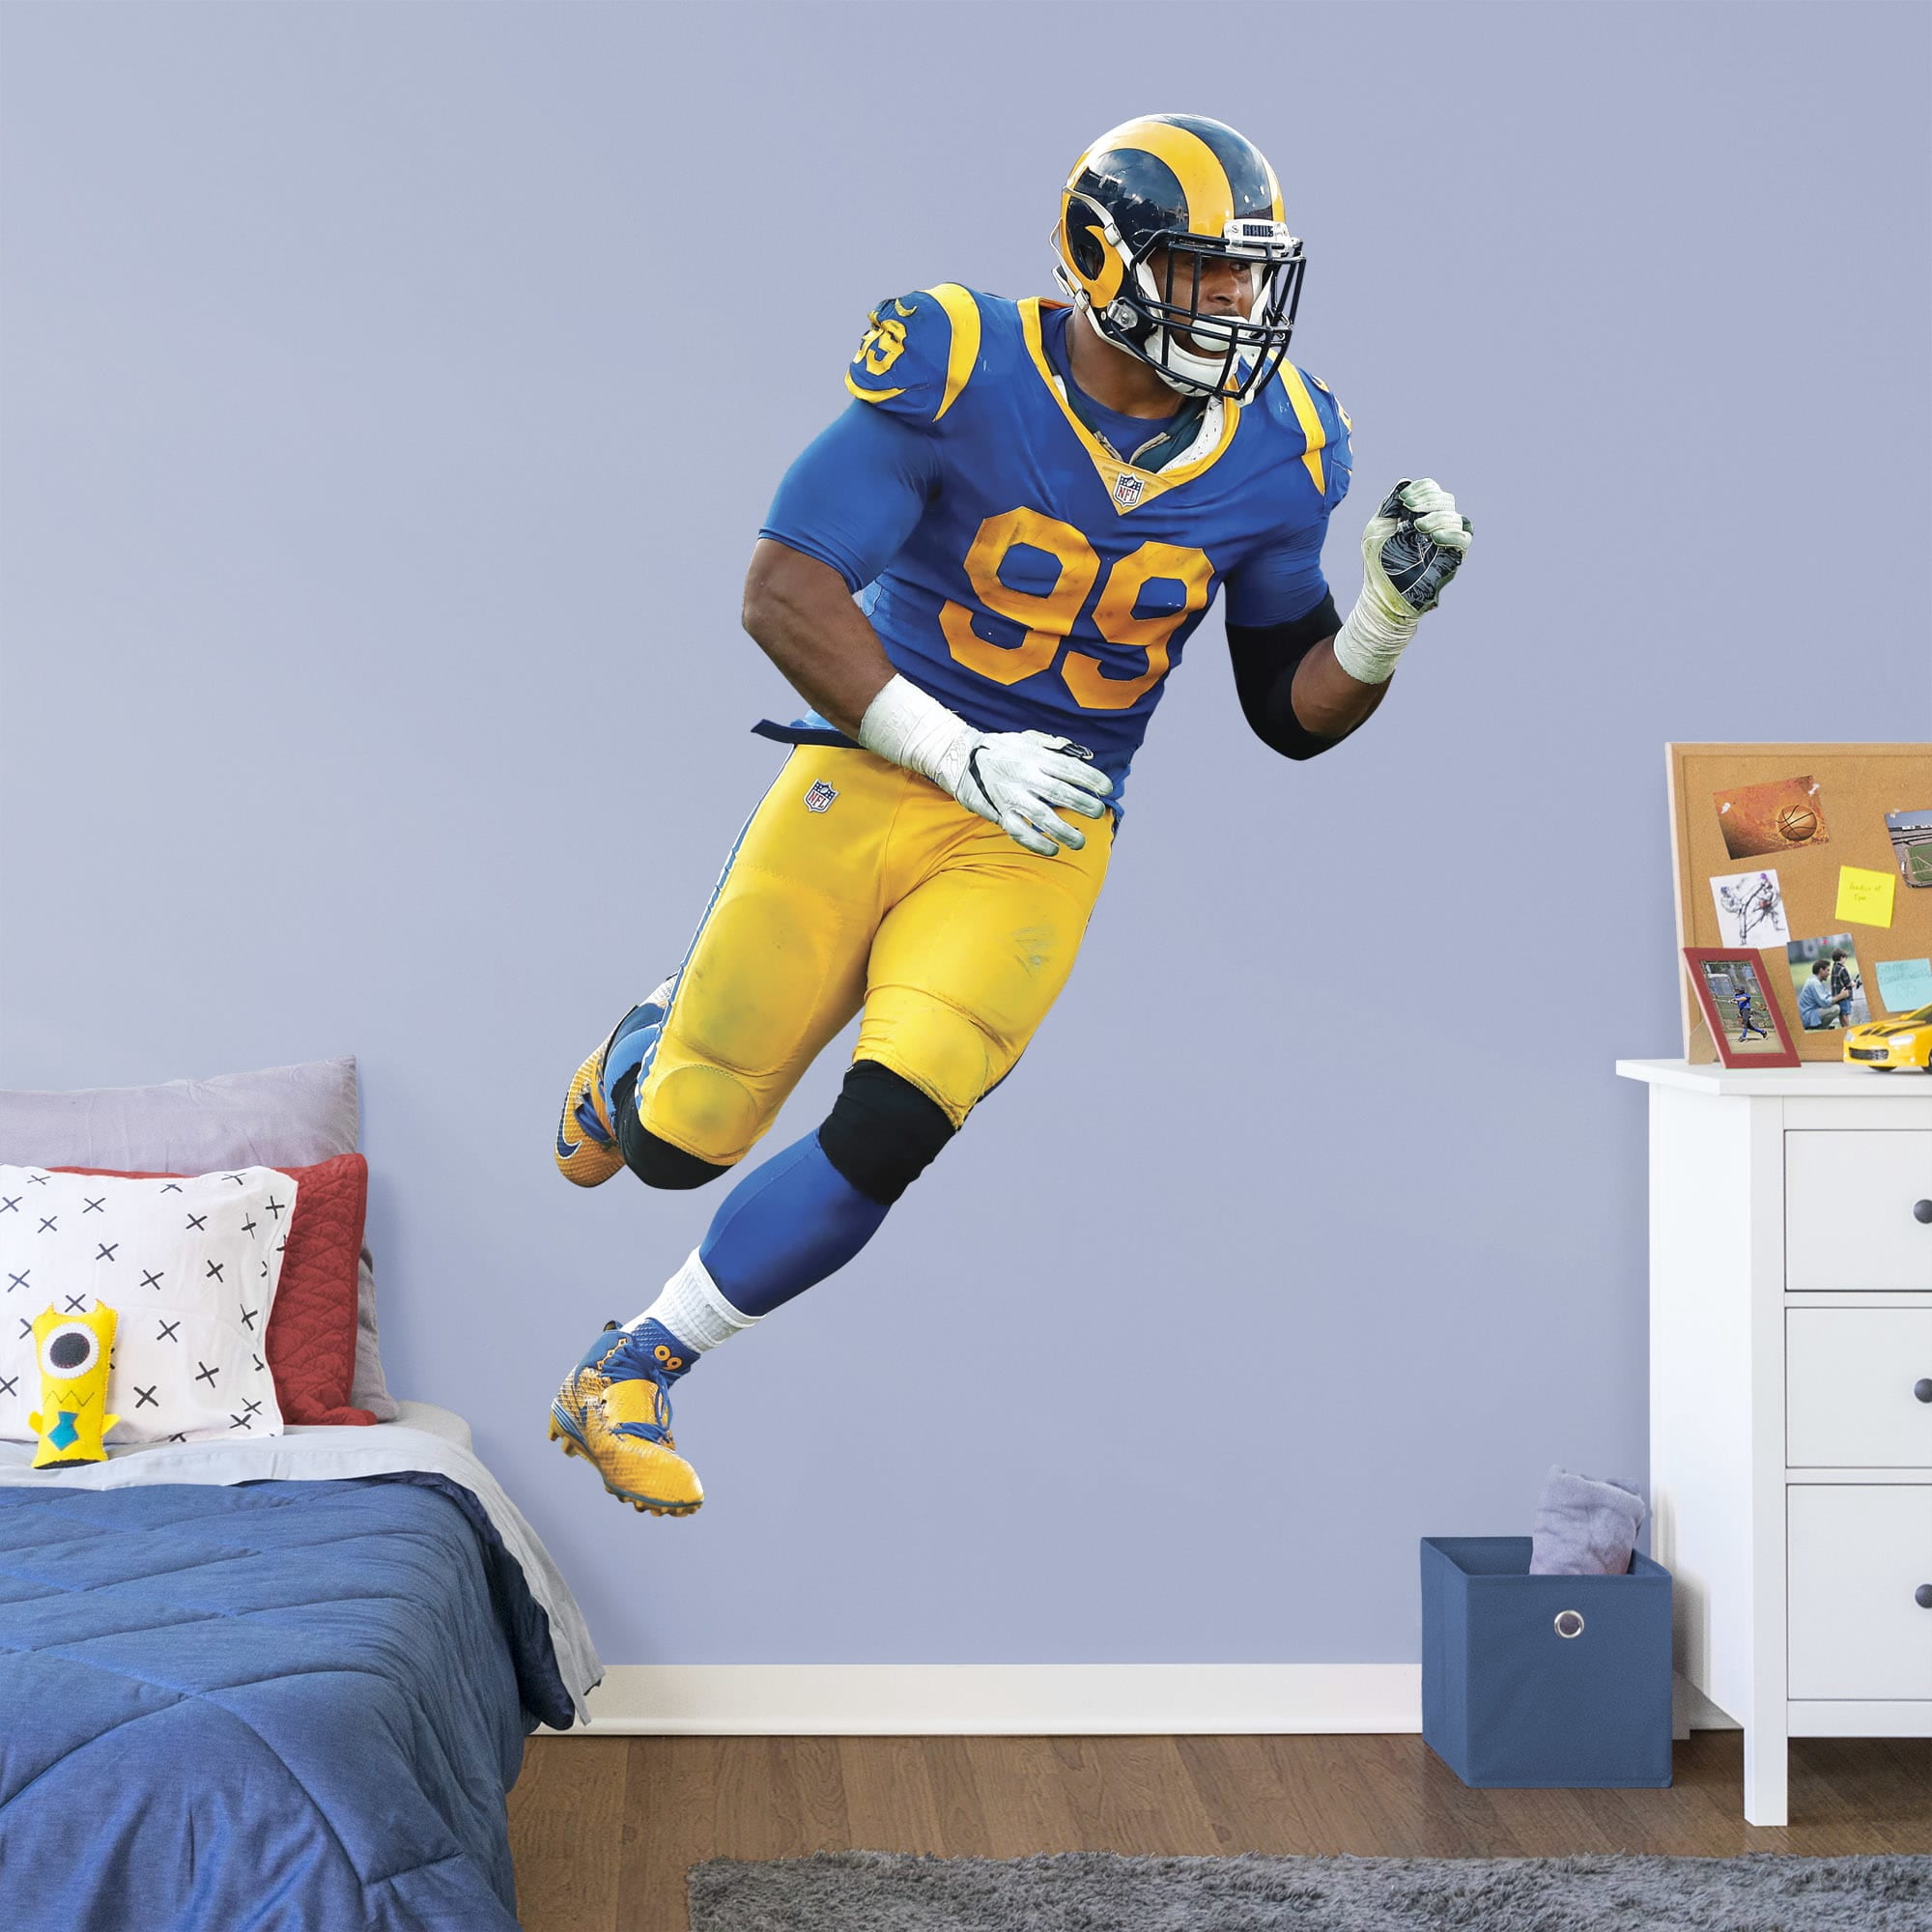 Fathead Aaron Donald: Throwback Jersey - Life-Size Officially Licensed NFL  Removable Wall Decal